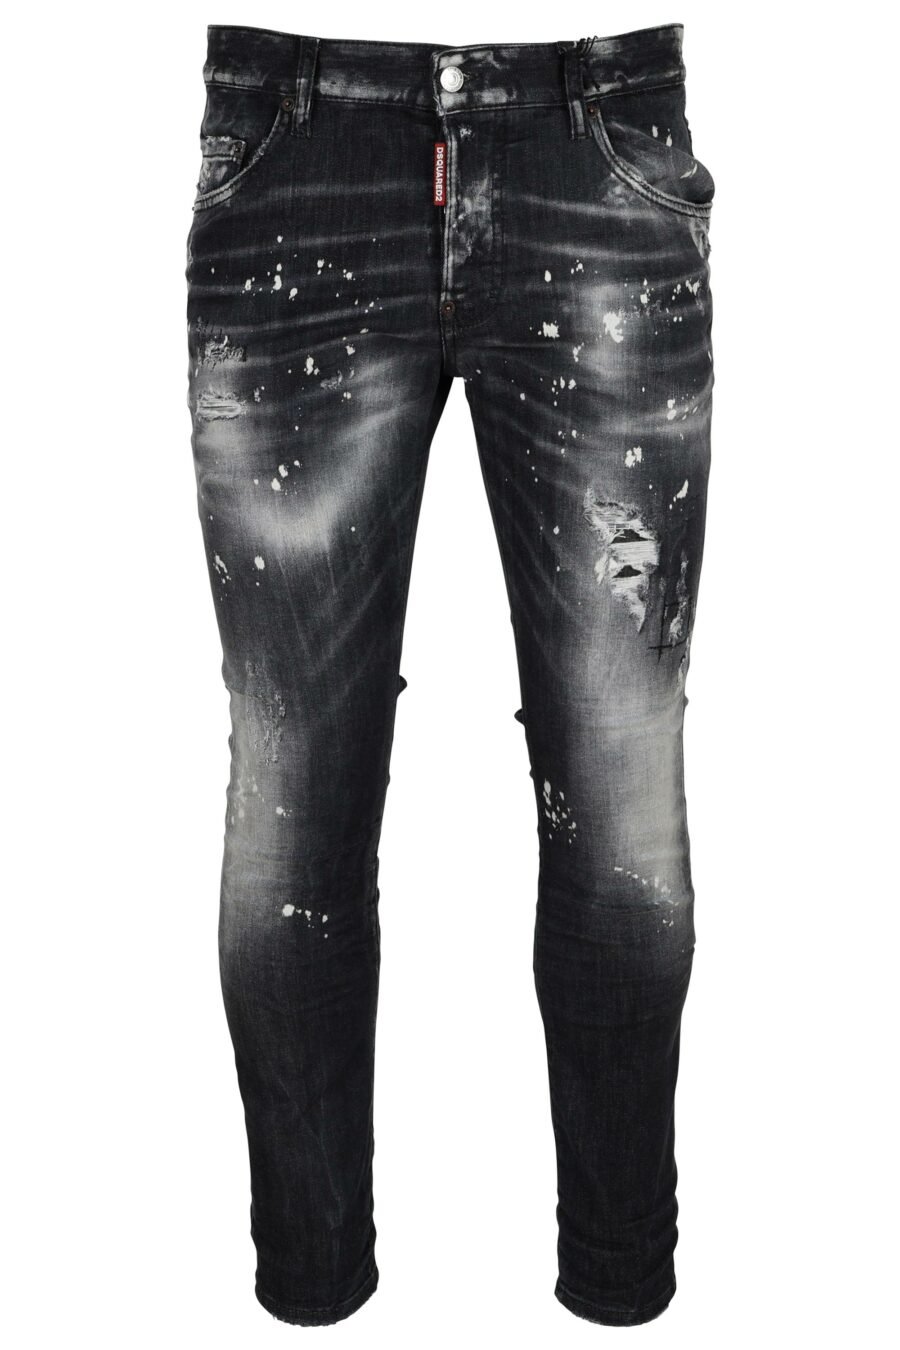 Black jeans "super twinky jean" with rips and semi-worn - 8054148473945